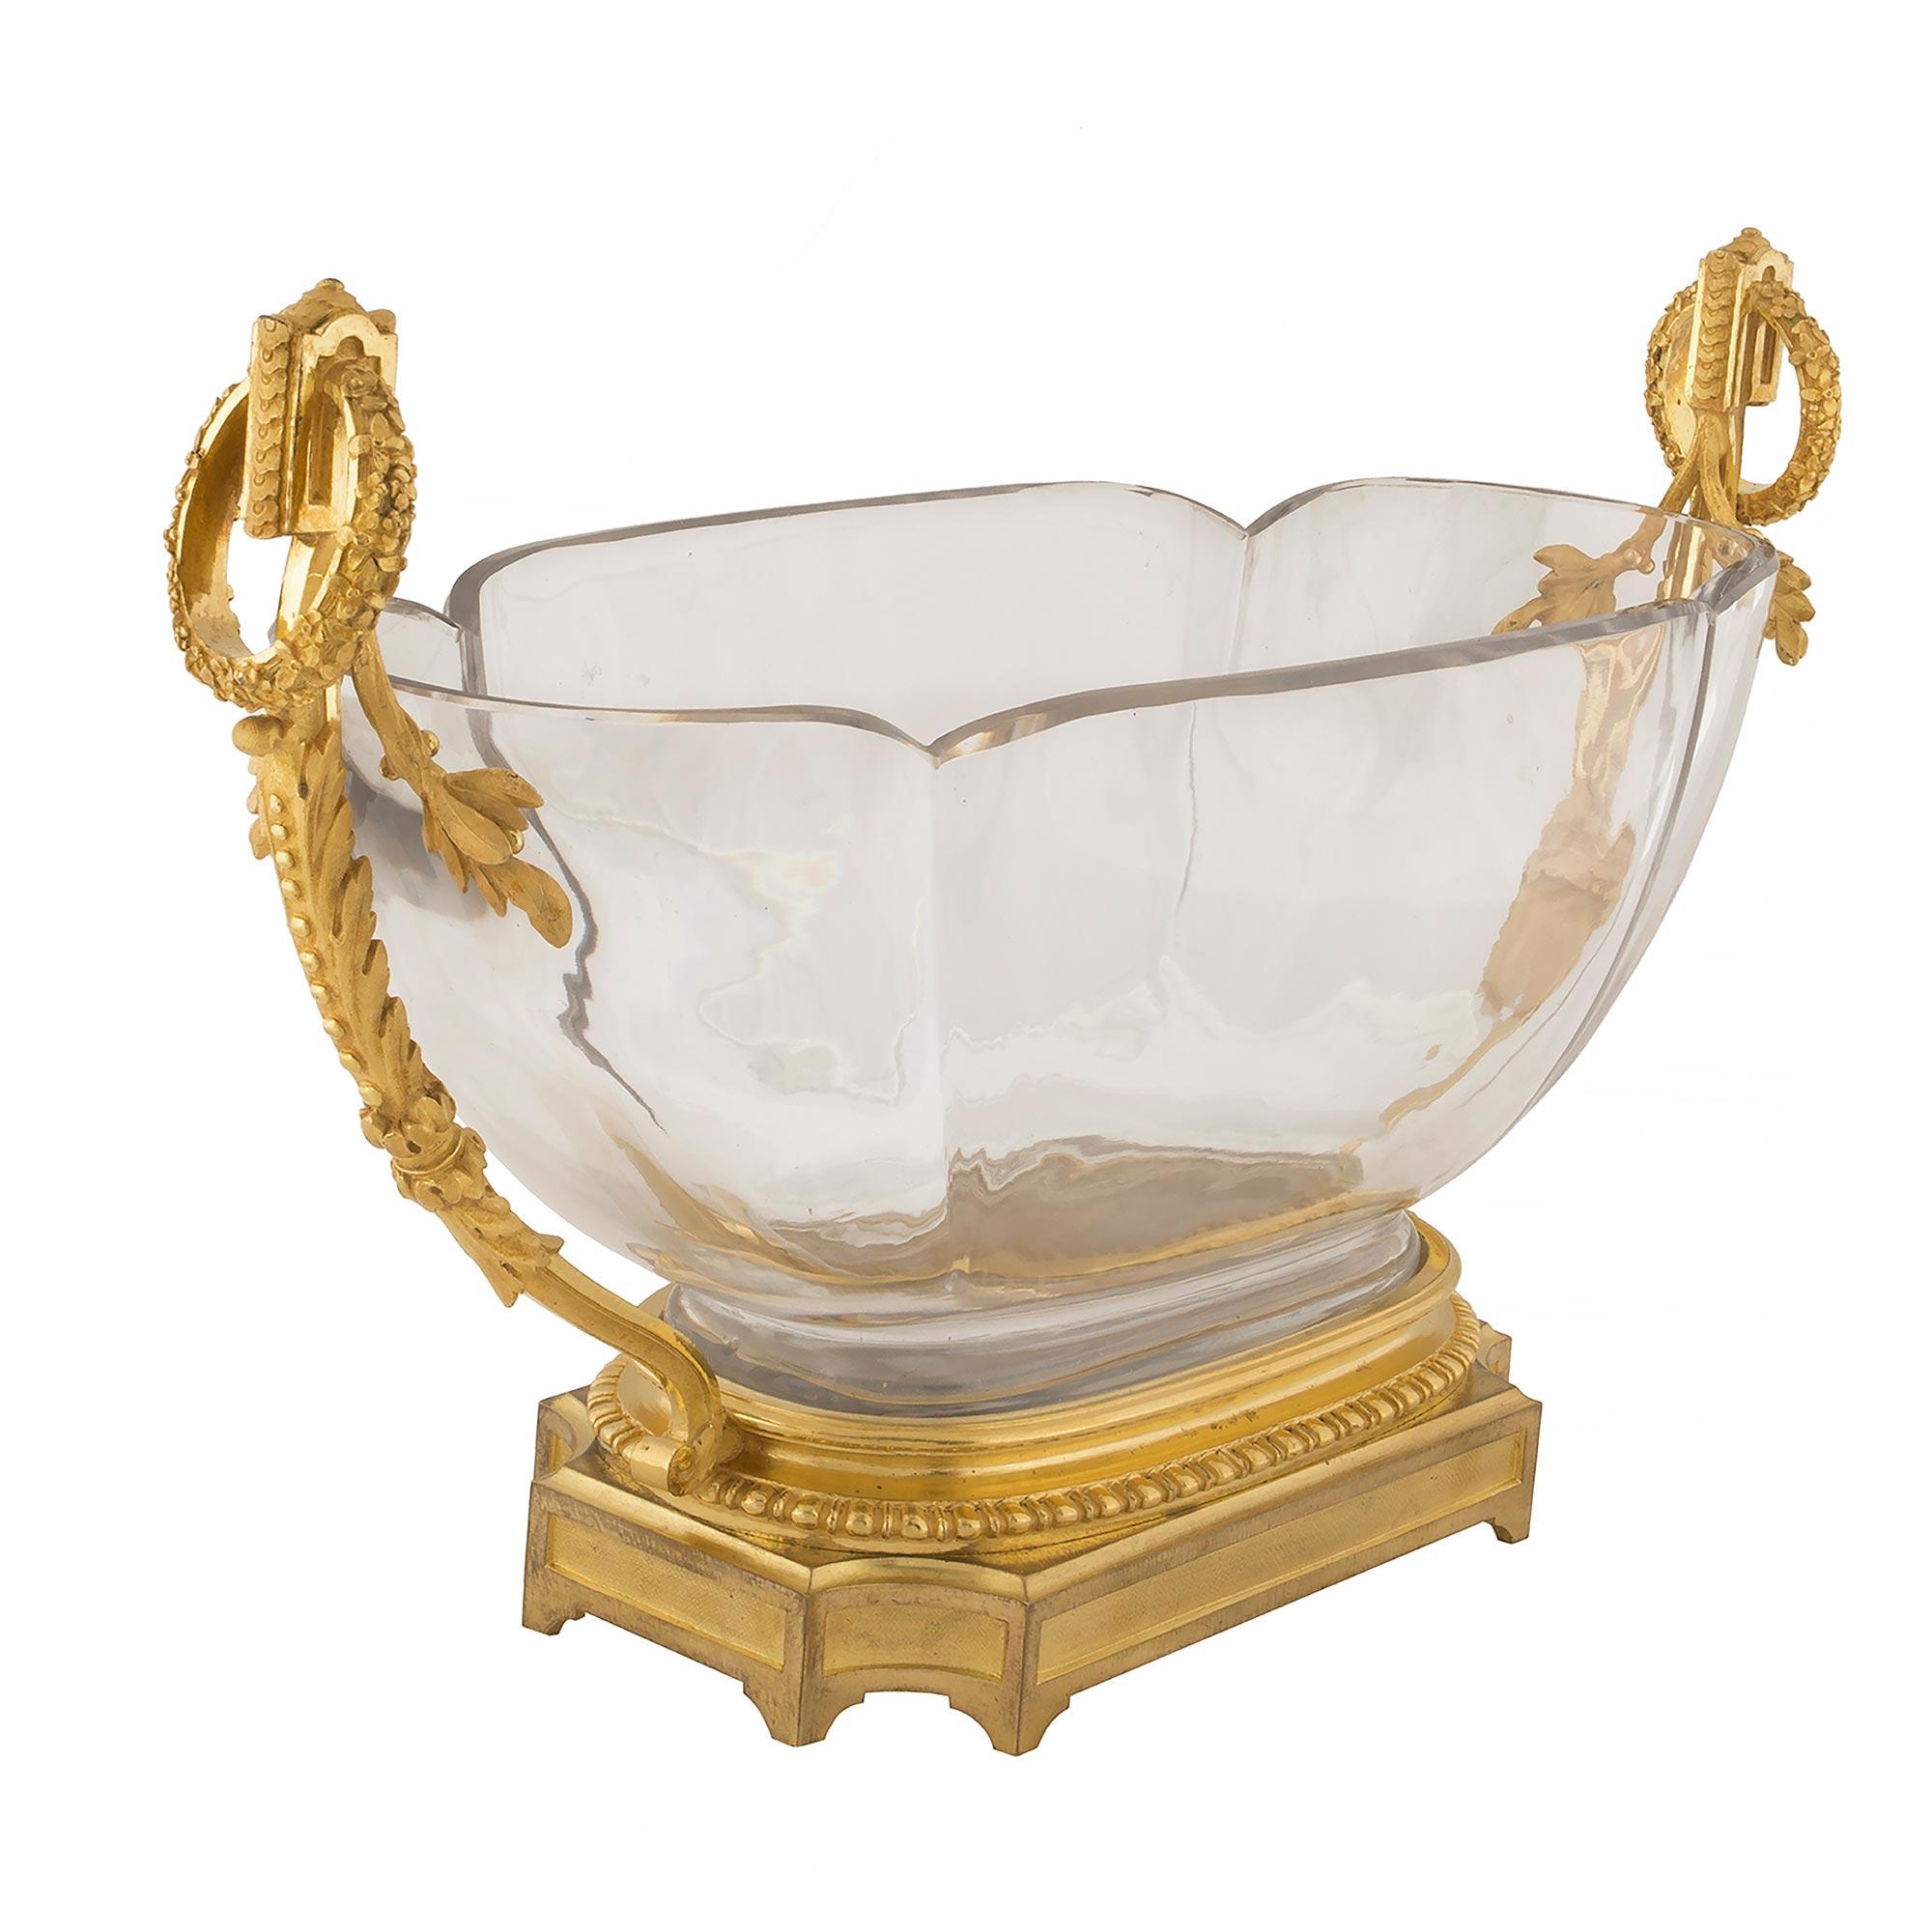 An elegant French 19th century Louis XVI St. ormolu and Baccarat crystal centerpiece bowl. The centerpiece is raised by a rectangular ormolu base with concave corners and decorative recessed panels. The bowl is supported by a fine mottled base with